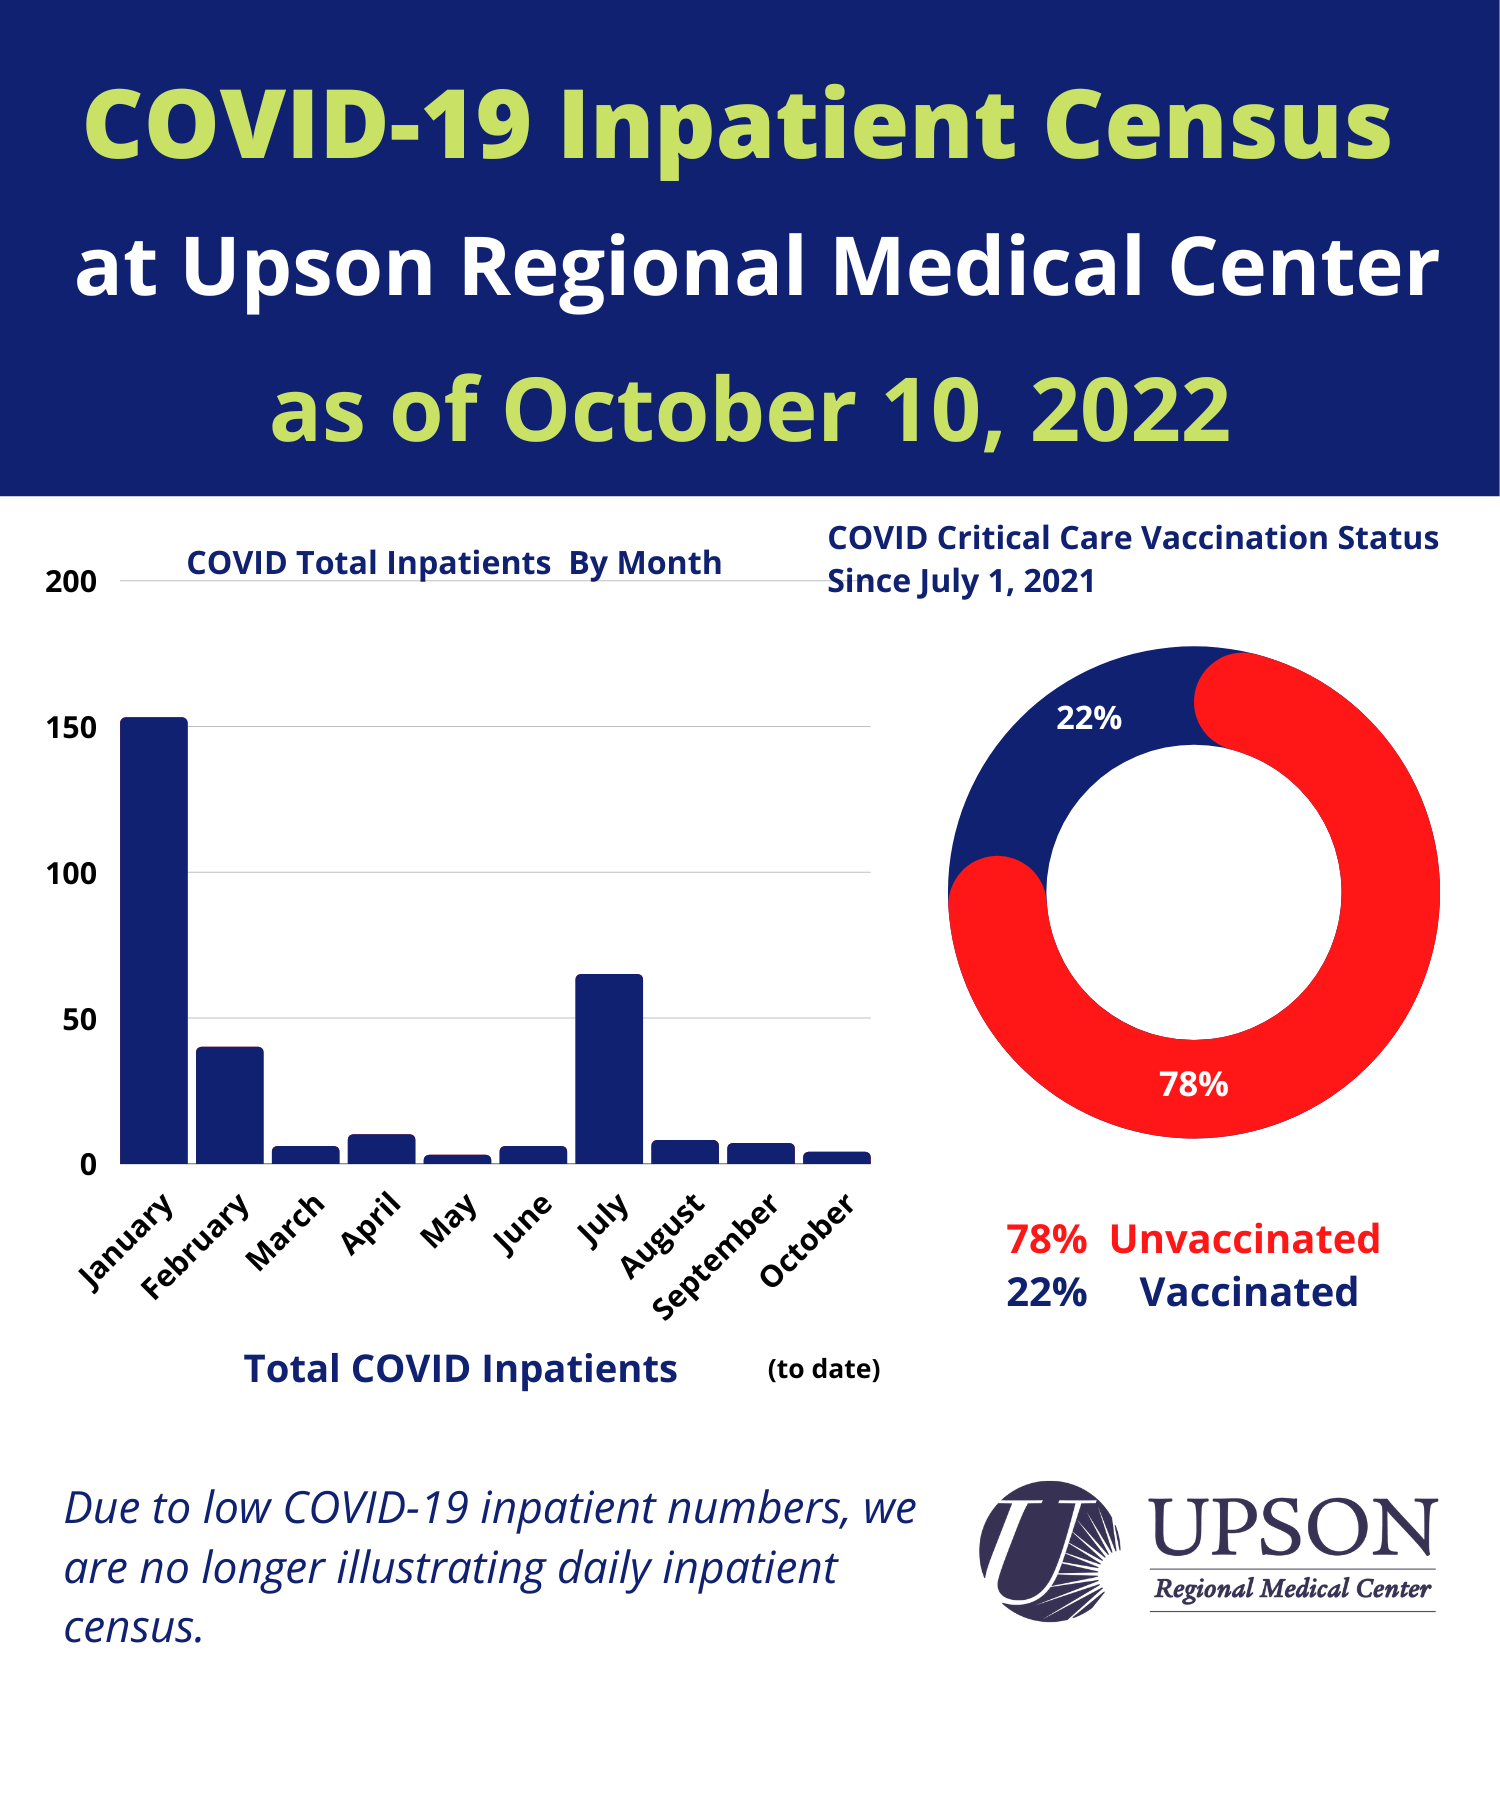 Photo for URMC COVID-19 Inpatient Census as of October 10, 2022